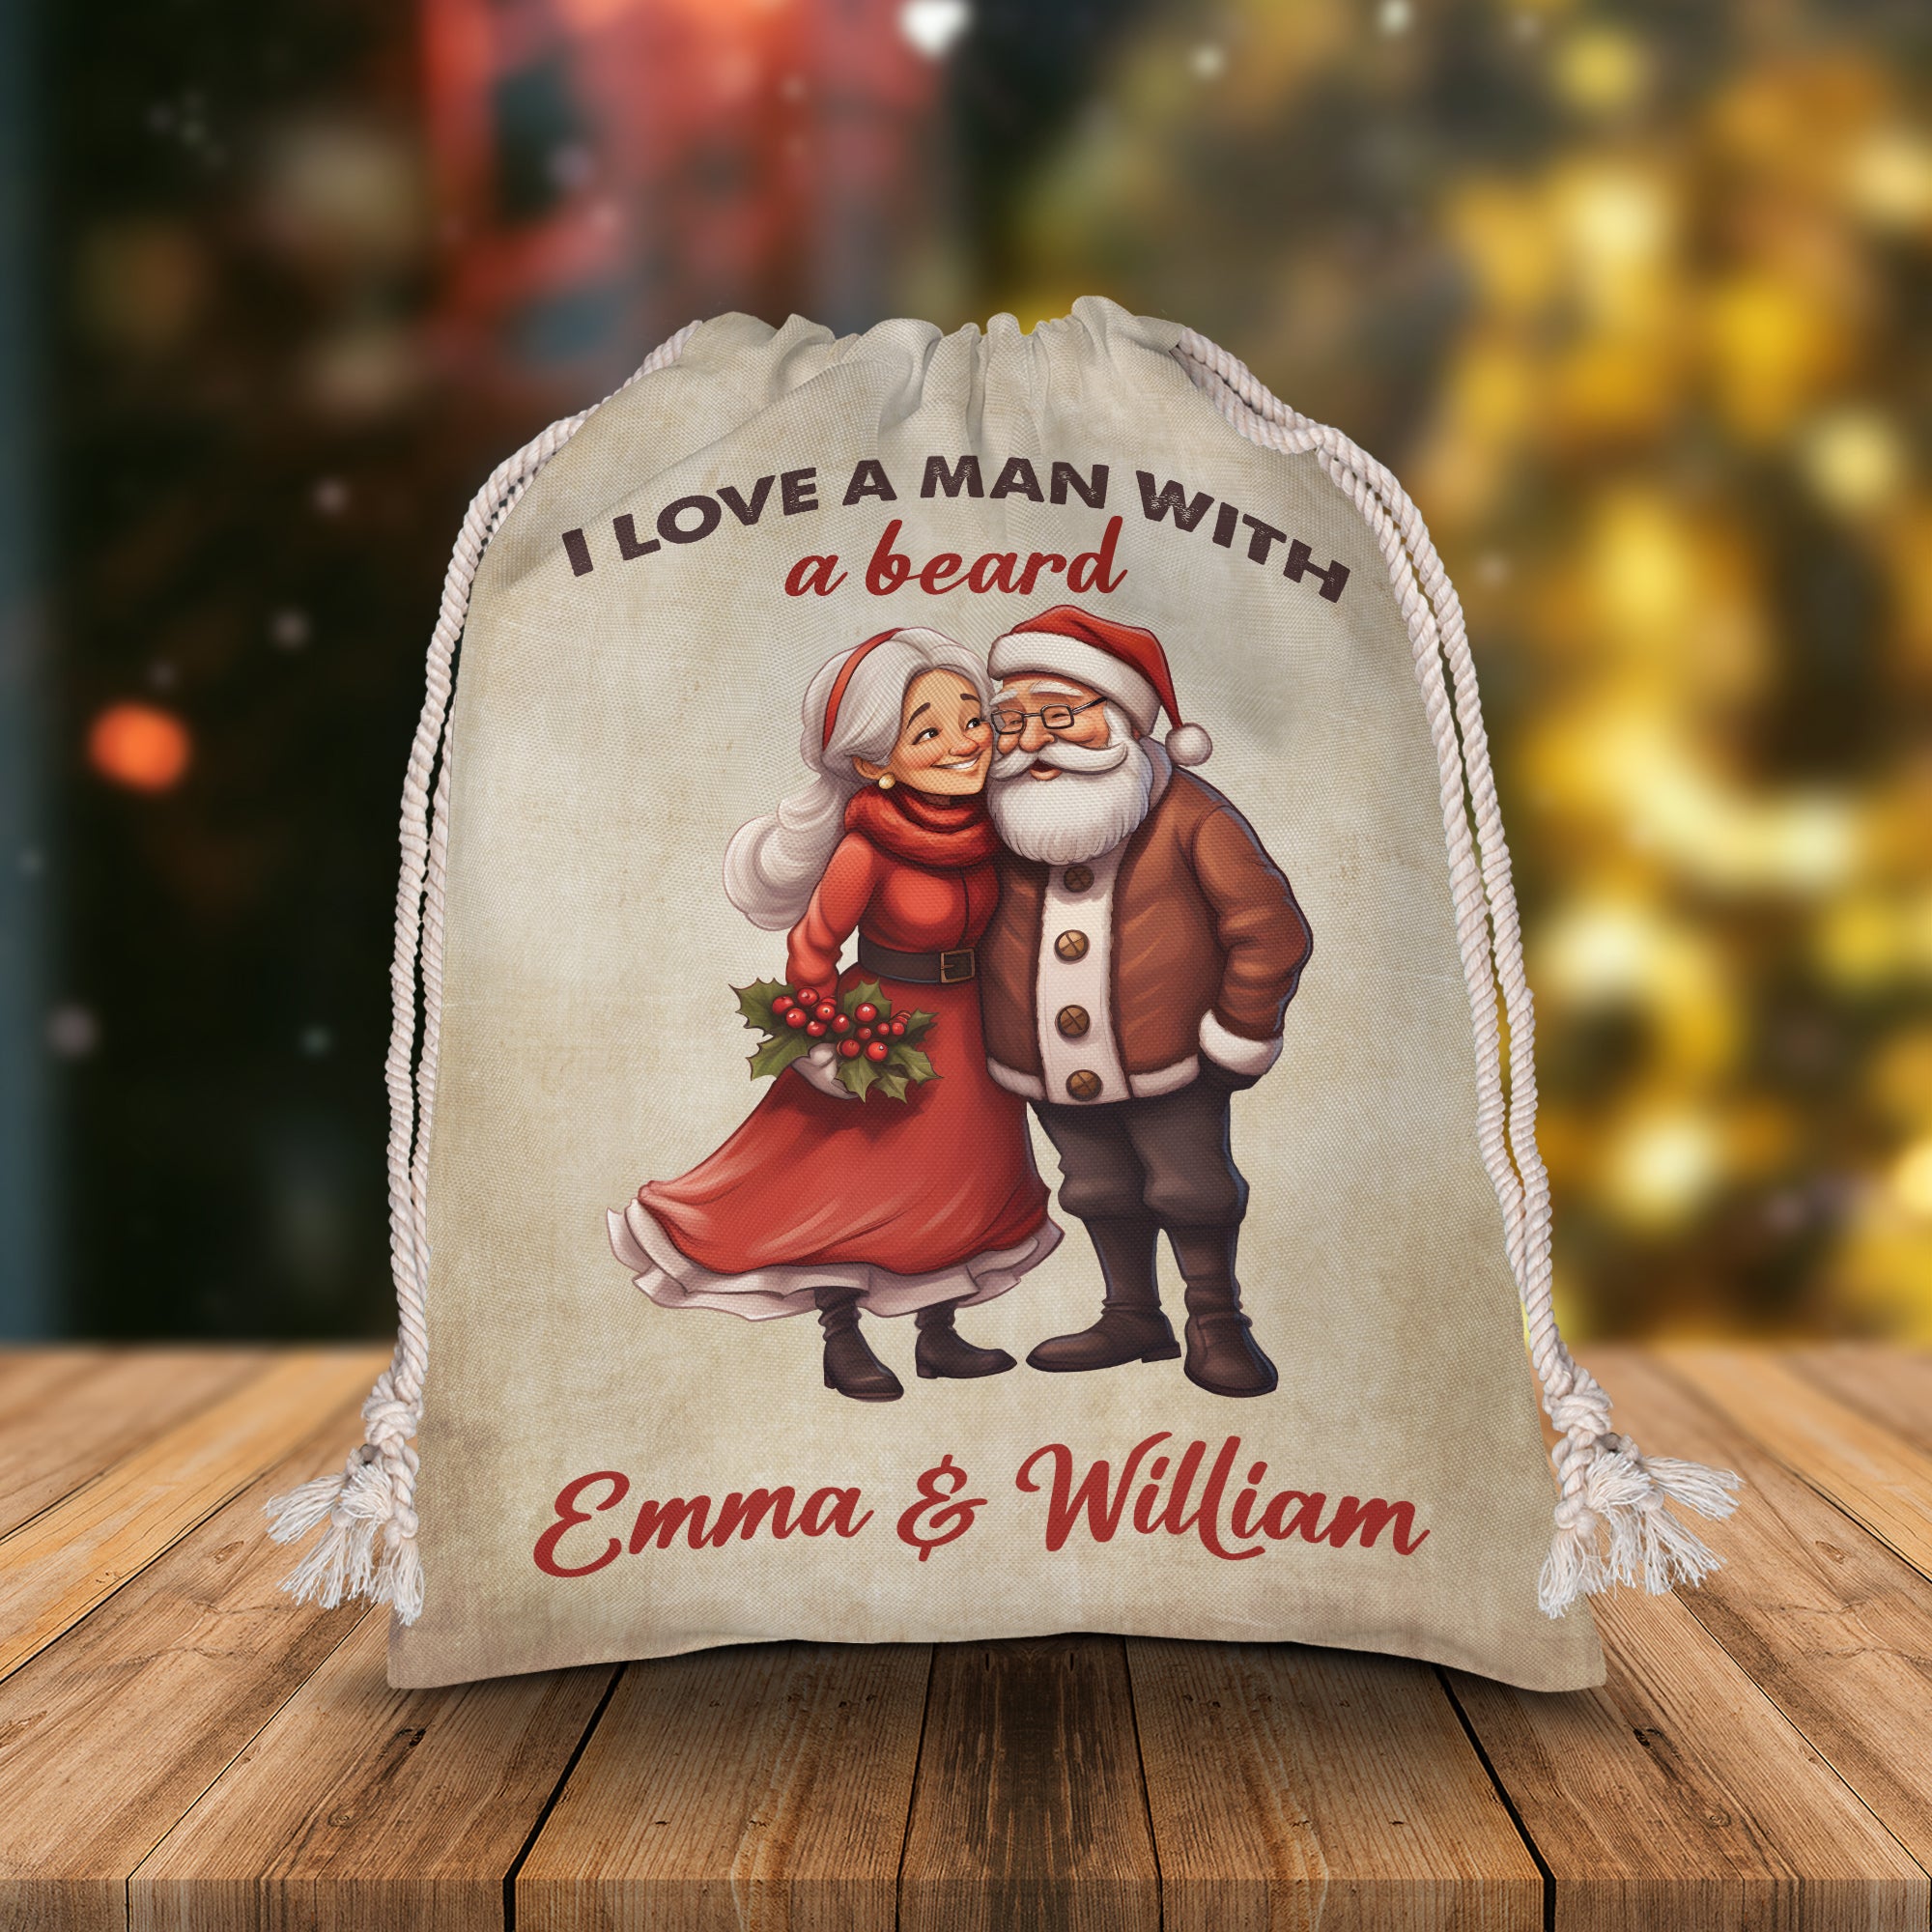 I Love A Man With A Beard - Custom Name, Personalized String Bag, Christmas Gift